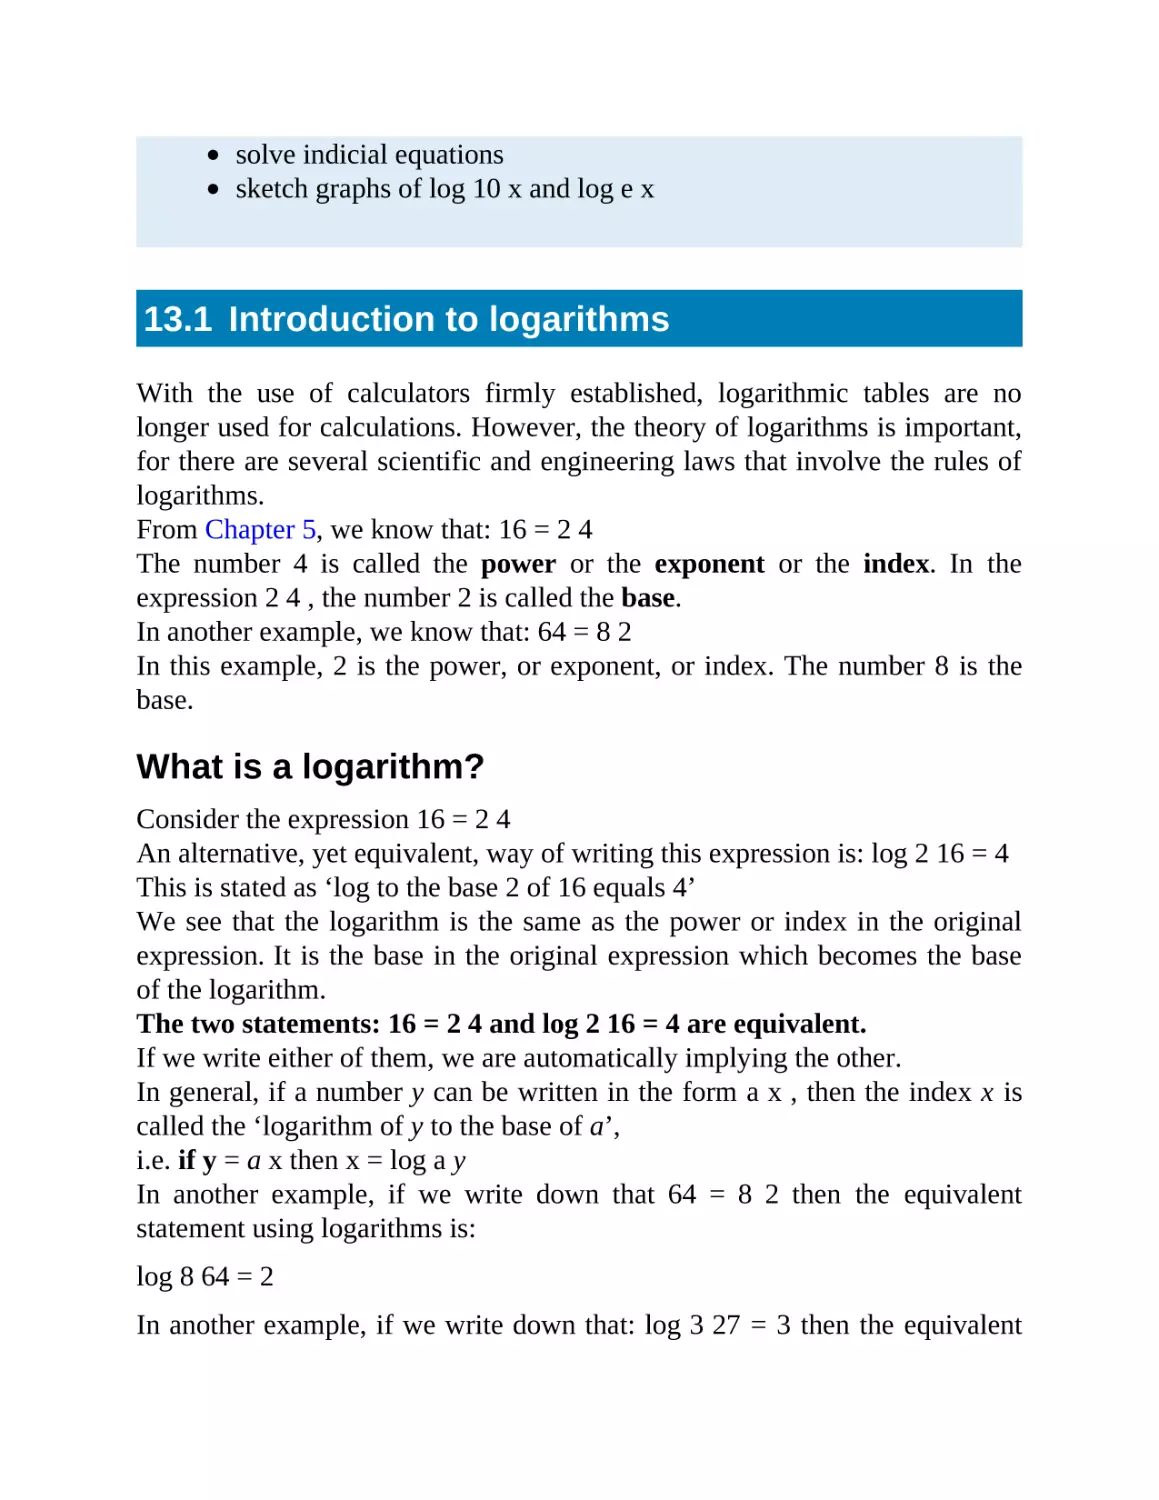 13.1 Introduction to logarithms